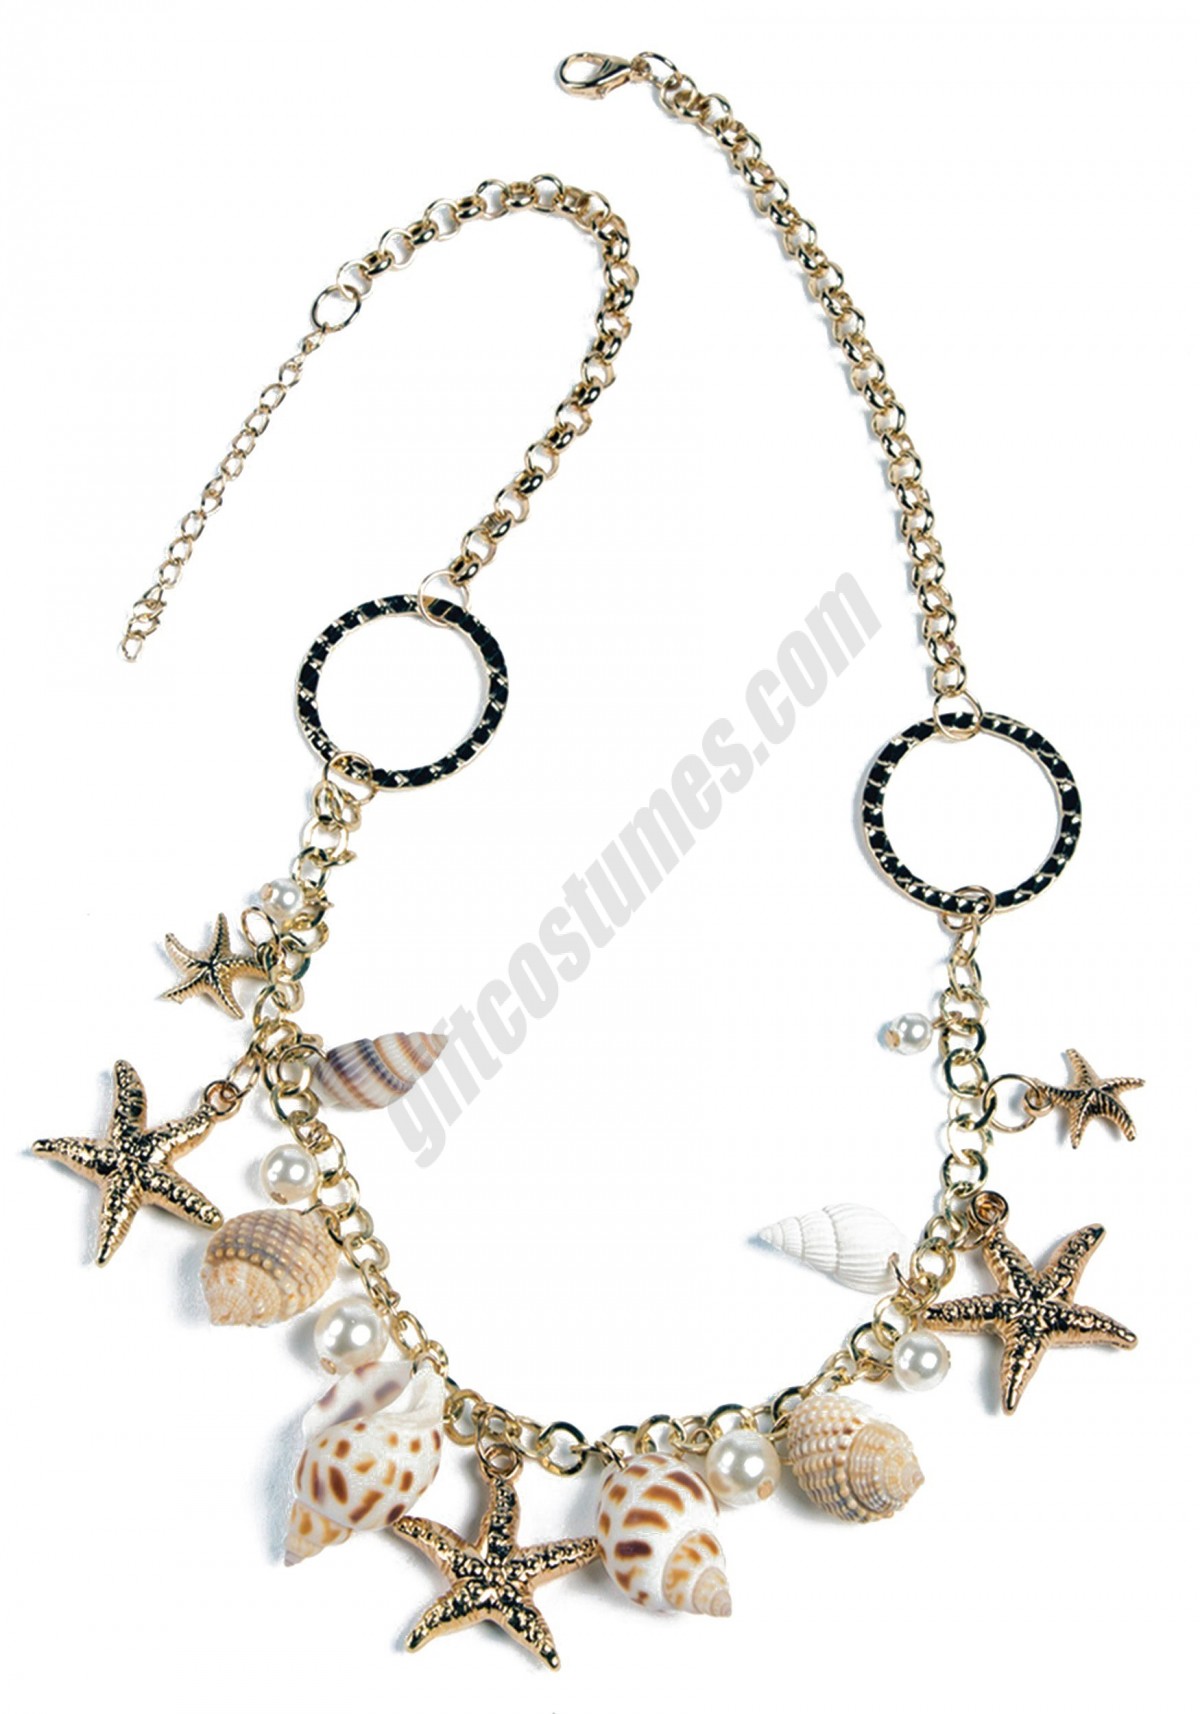 Mermaid Necklace Promotions - -0